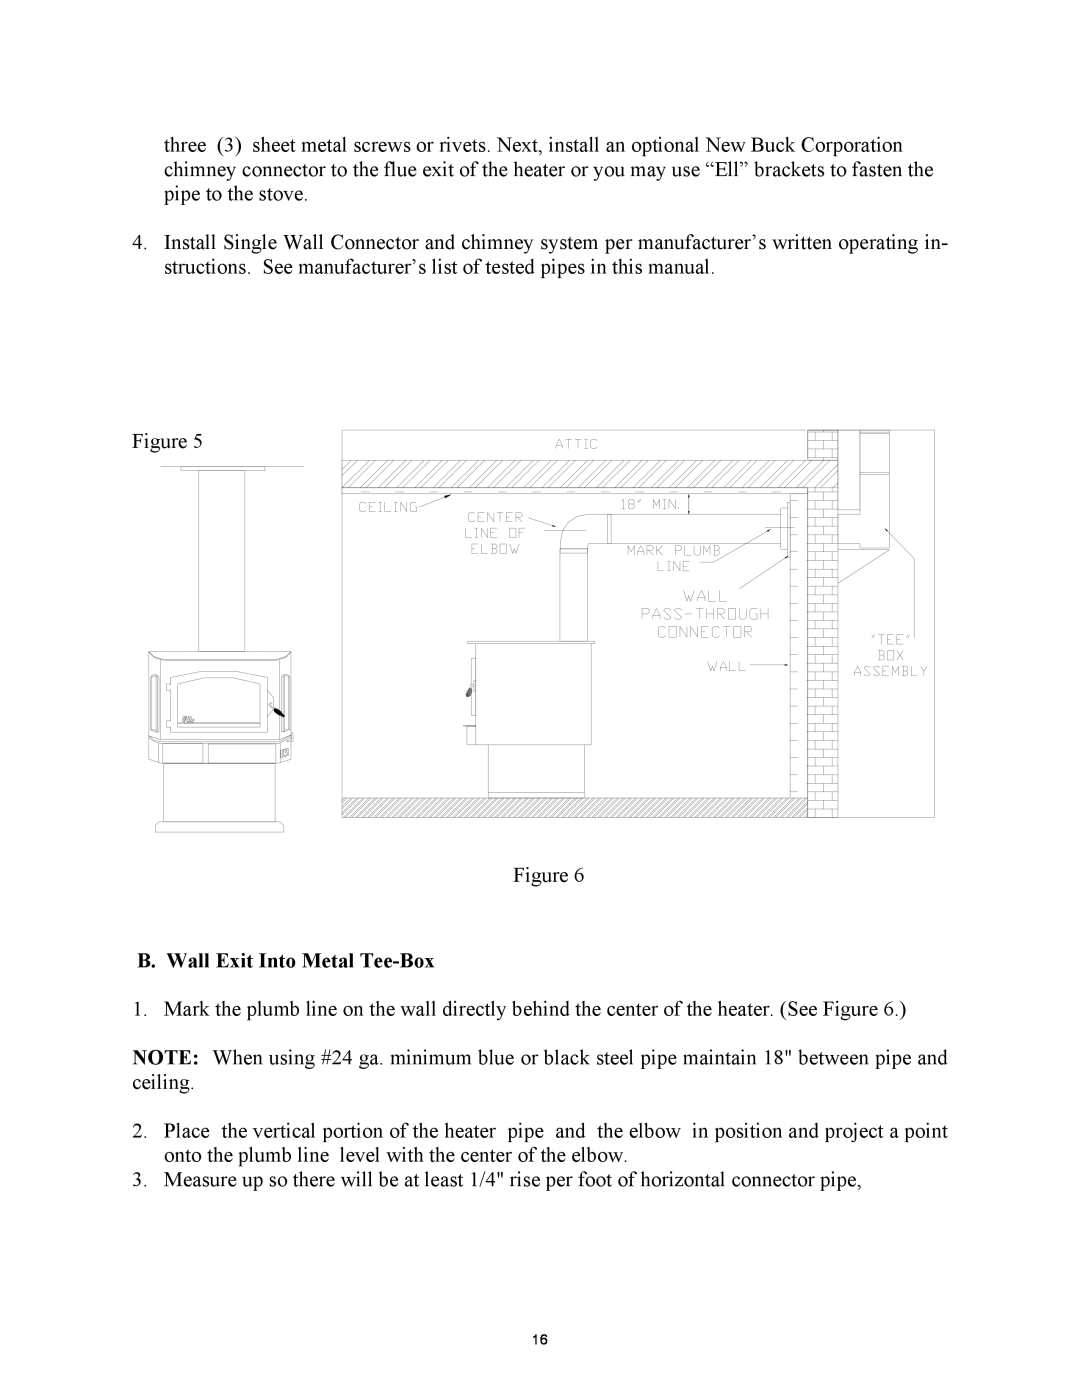 New Buck Corporation 81 installation instructions B.Wall Exit Into Metal Tee-Box 